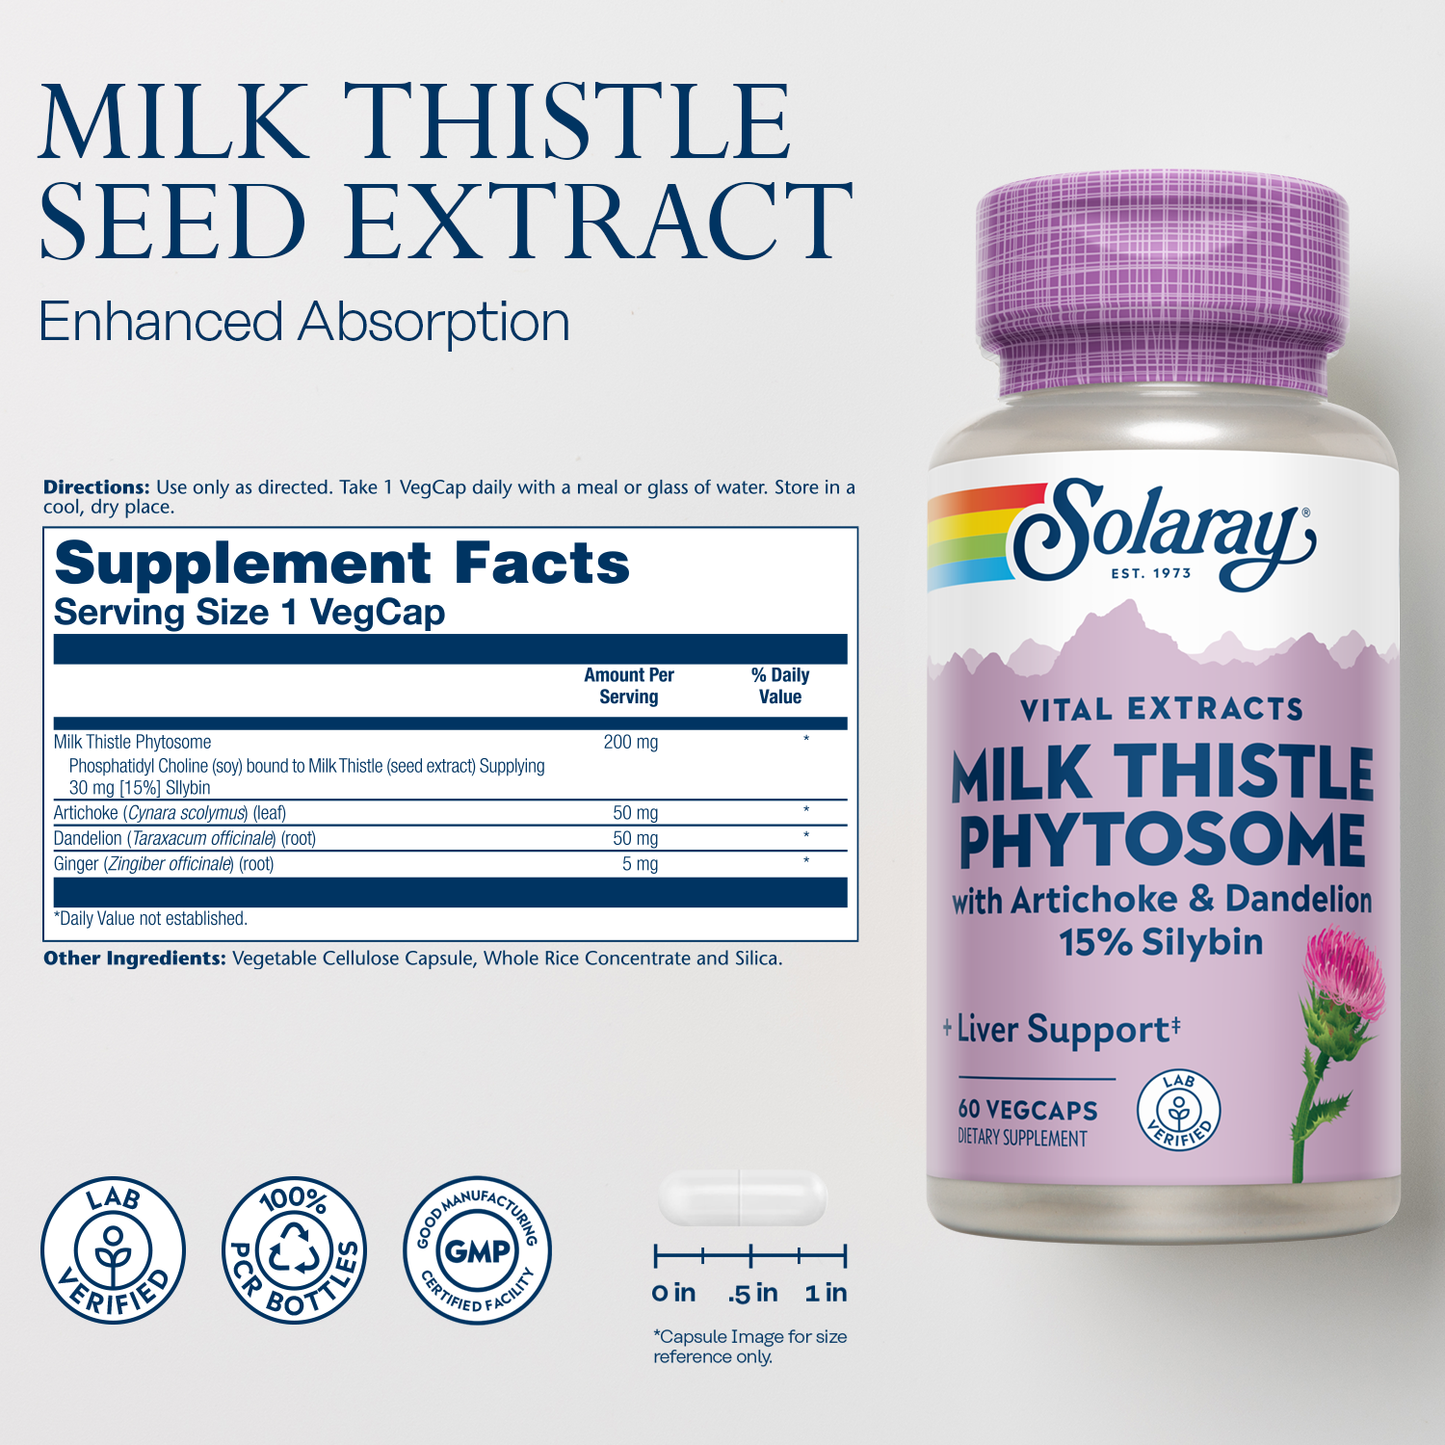 Solaray Milk Thistle Phytosome with Artichoke, Dandelion, and Ginger - Milk Thistle Extract Supplying 15% Silybin - Liver Supplement - 60-Day Guarantee, Lab Verified - 60 Servings, 60 VegCaps